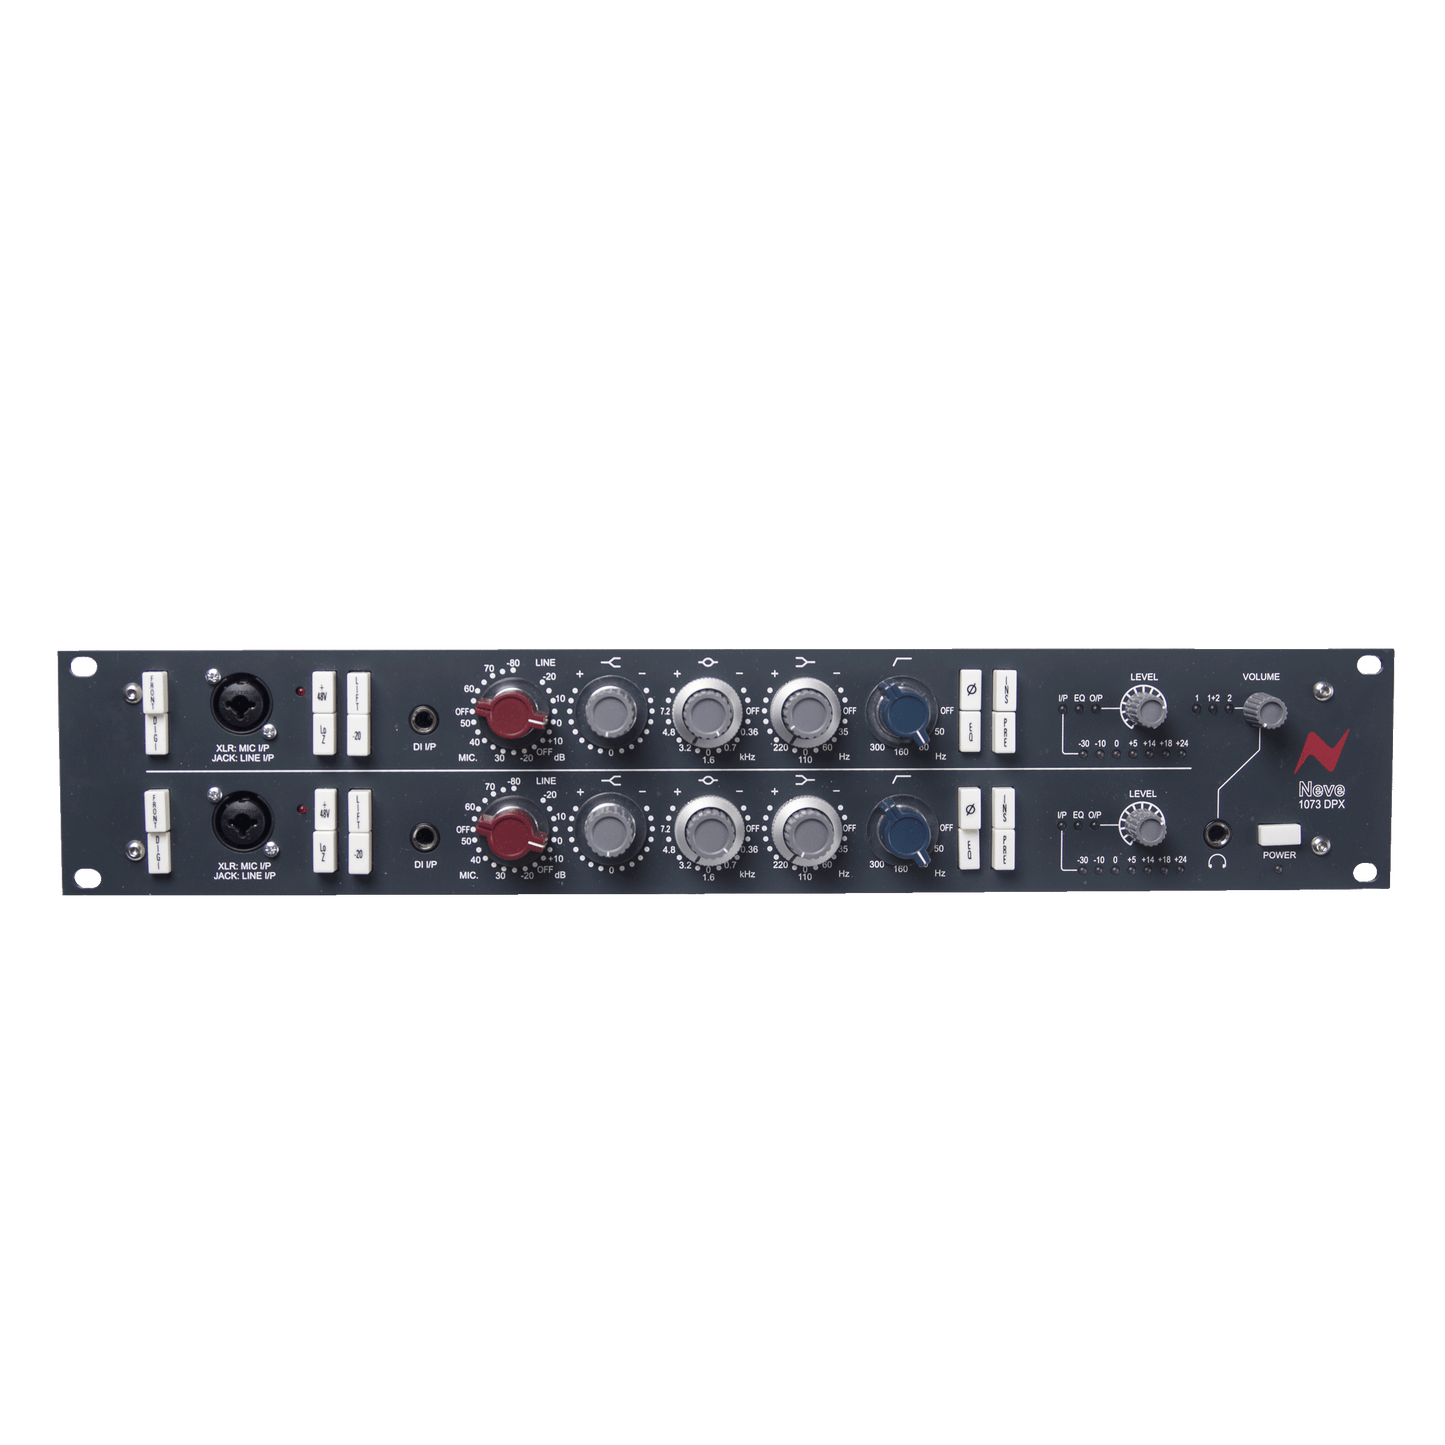 Neve 1073 DPX Mic Preamplifier / EQ (C101563)